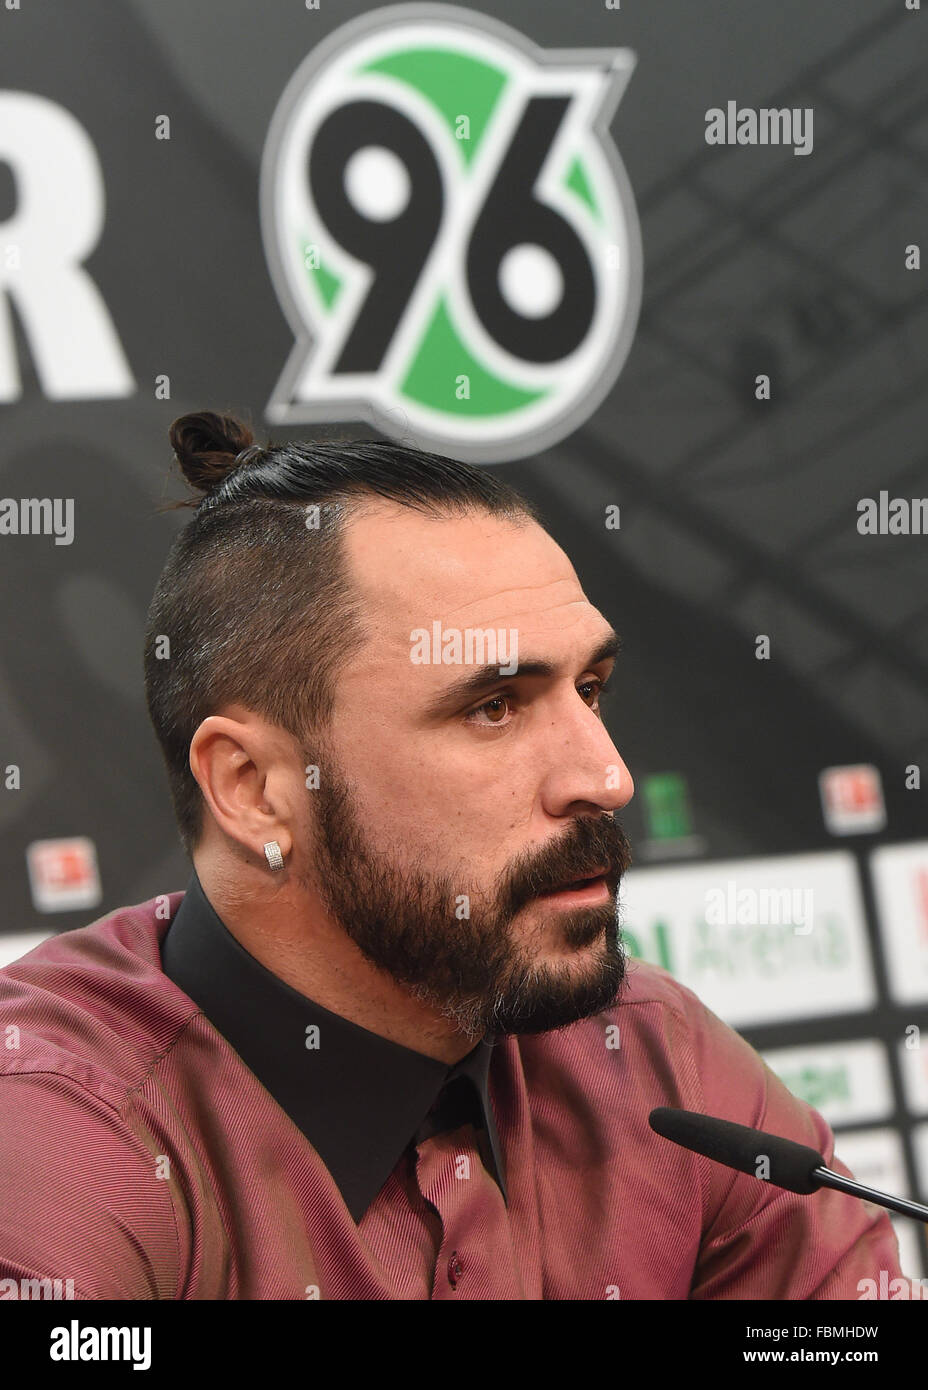 Hanover, Germany. 18th Jan, 2016. New arrival Hugo Almeida attends a press conference of German Bundesliga soccer club Hannover 96 at the HDI-Arena in Hanover, Germany, 18 January 2016. Photo: HOLGER HOLLEMANN/dpa/Alamy Live News Stock Photo